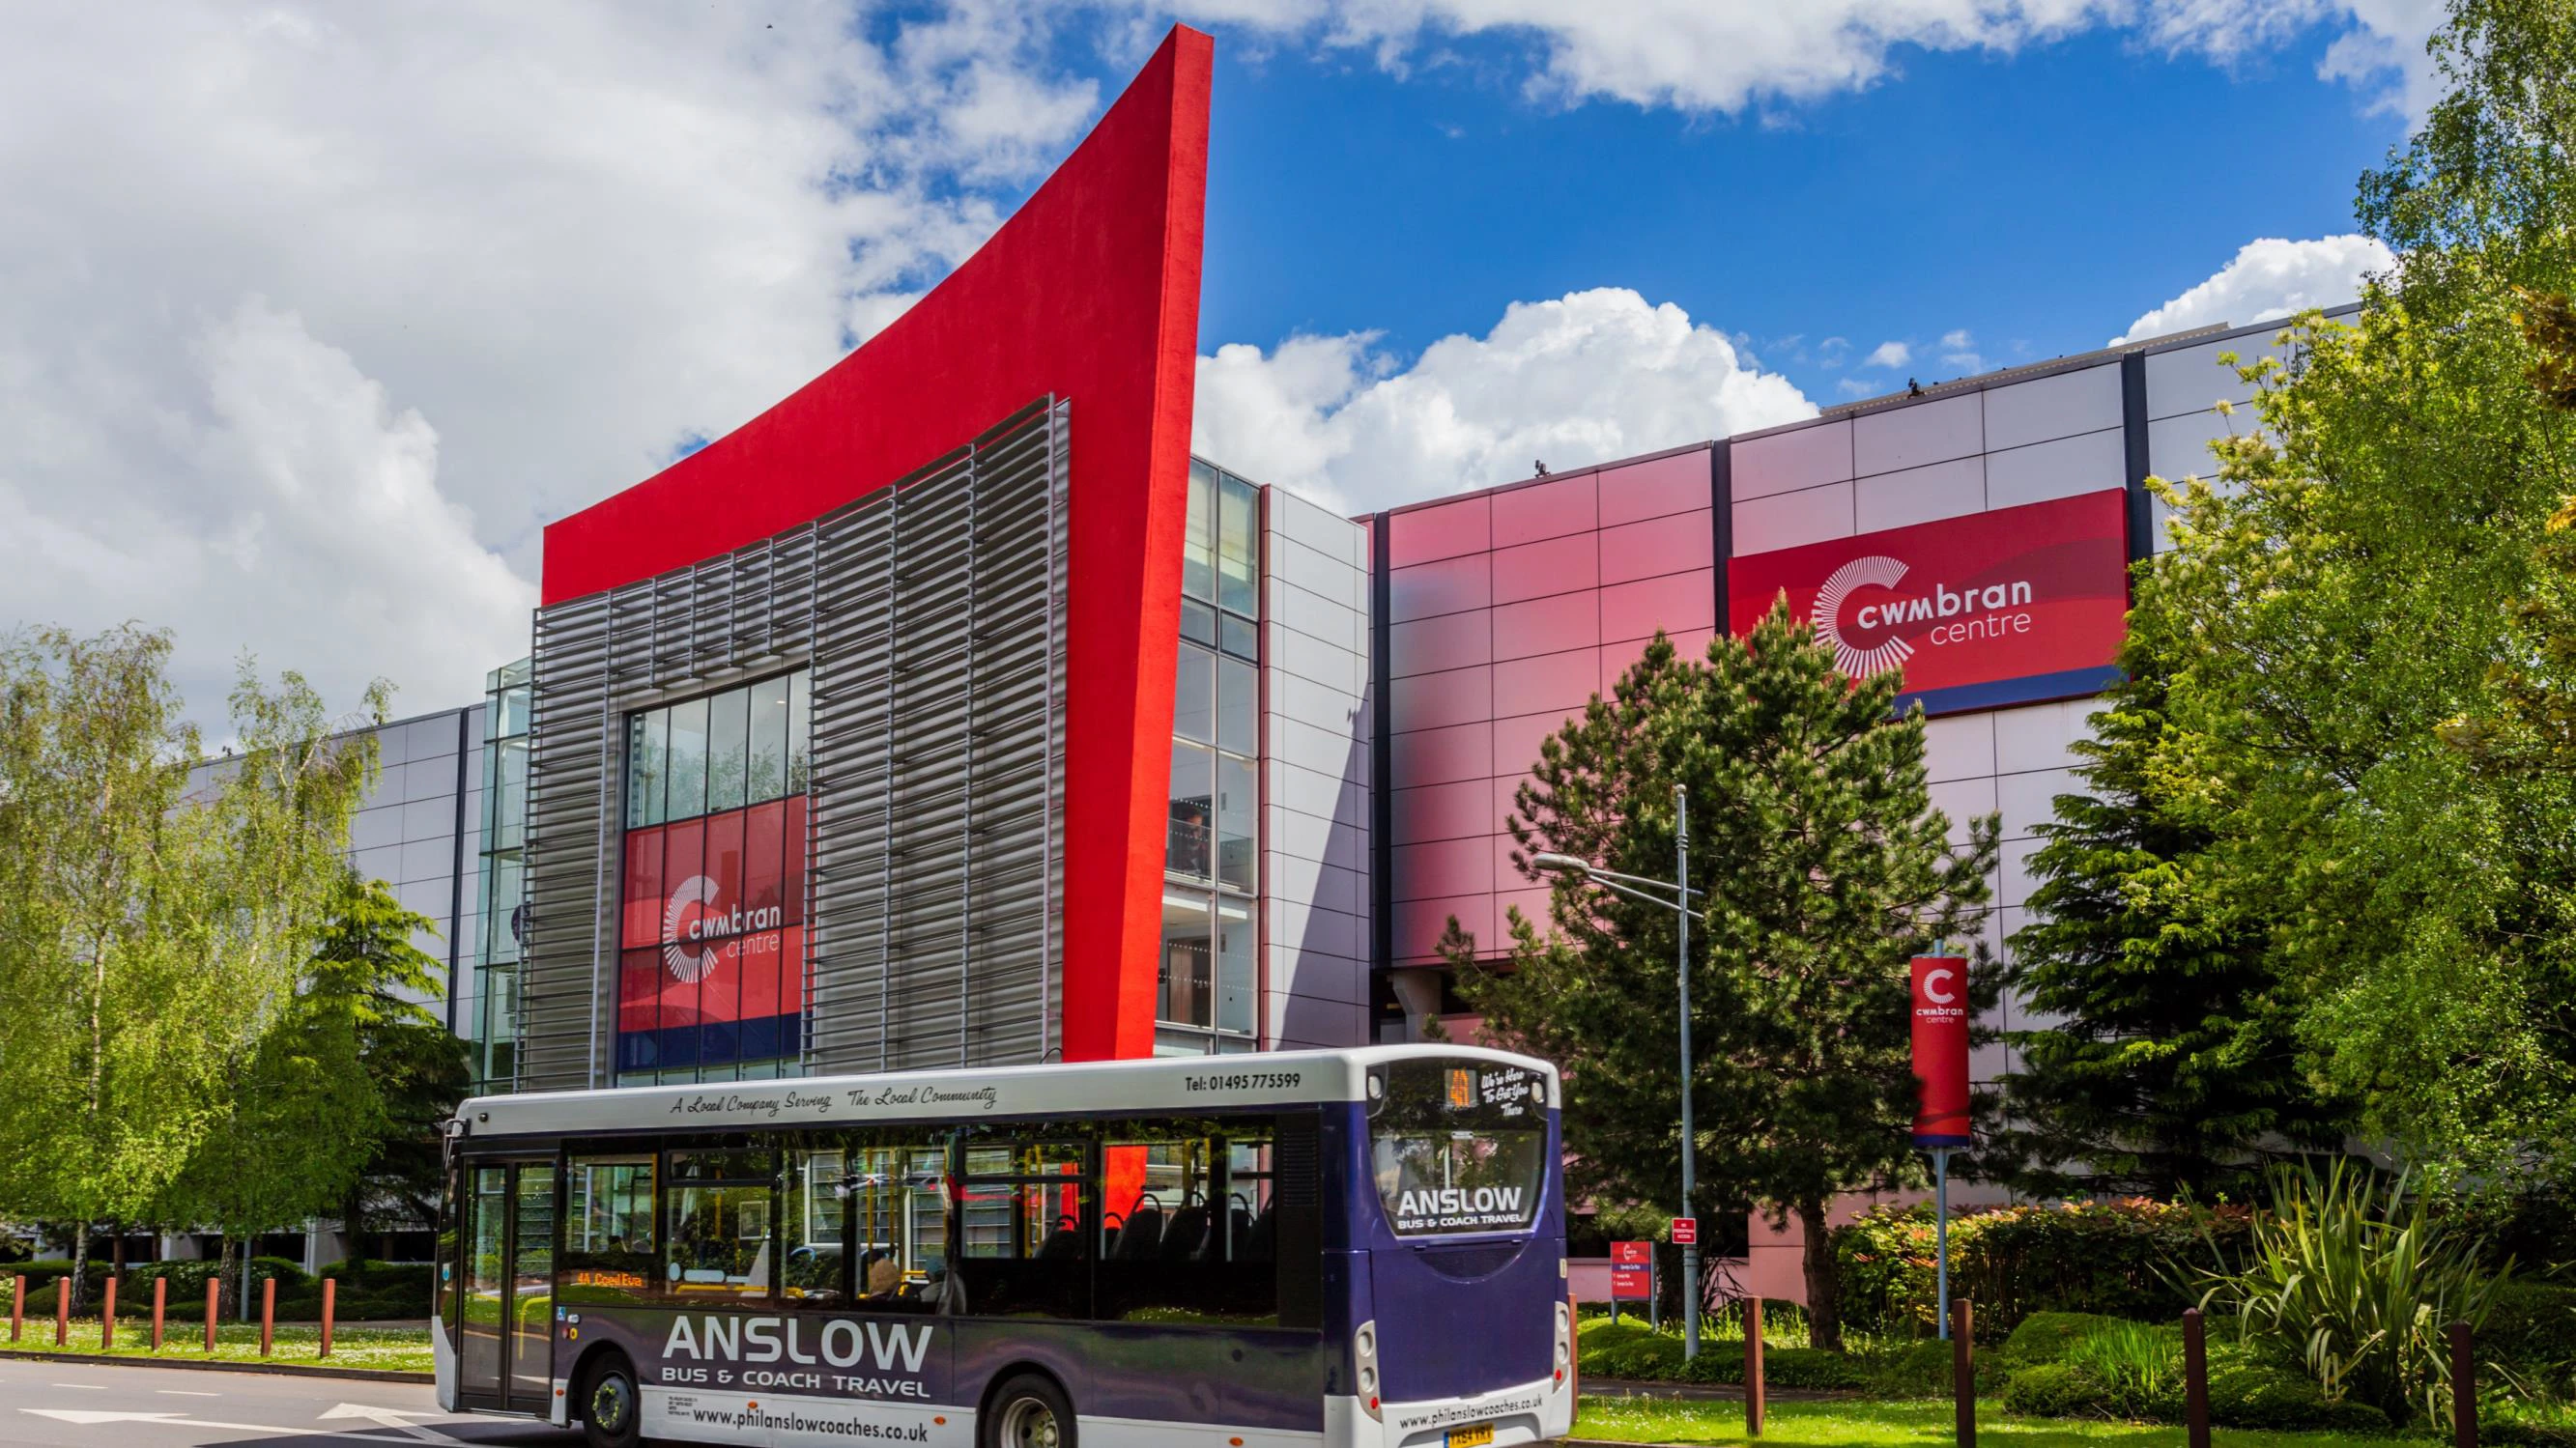 The Cwmbran Centre, Wales's largest shopping centre, one of LCP's retail acquisitions